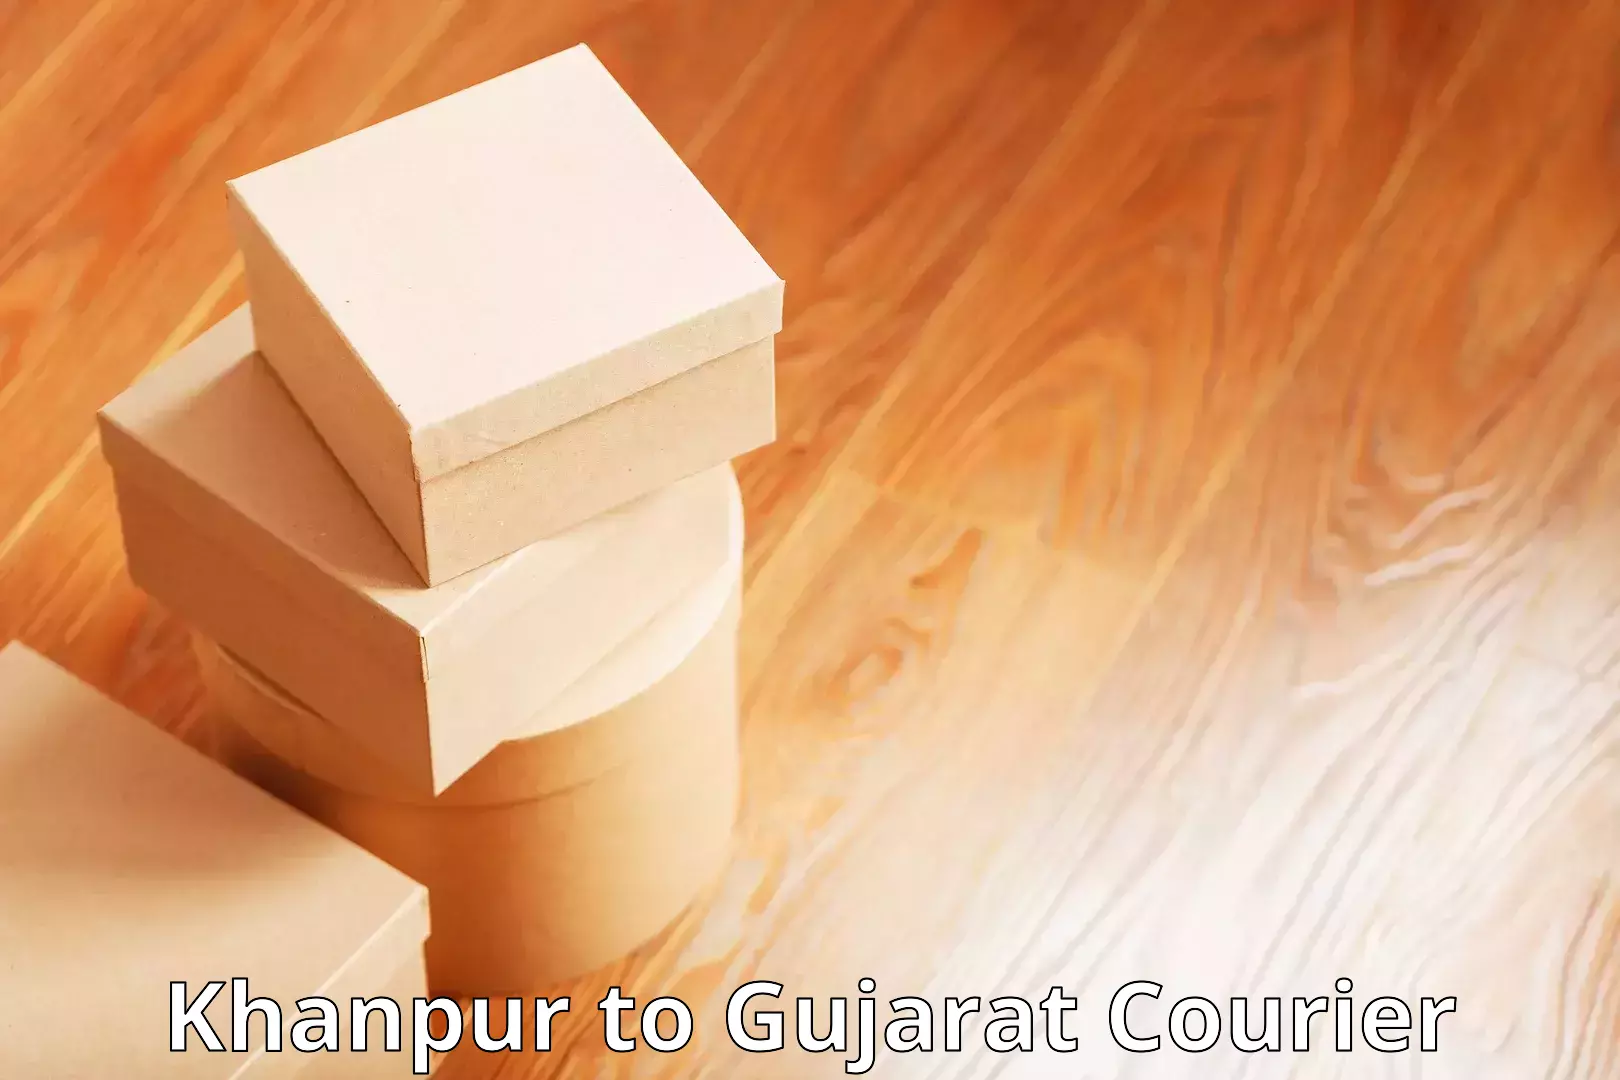 User-friendly delivery service Khanpur to Gujarat